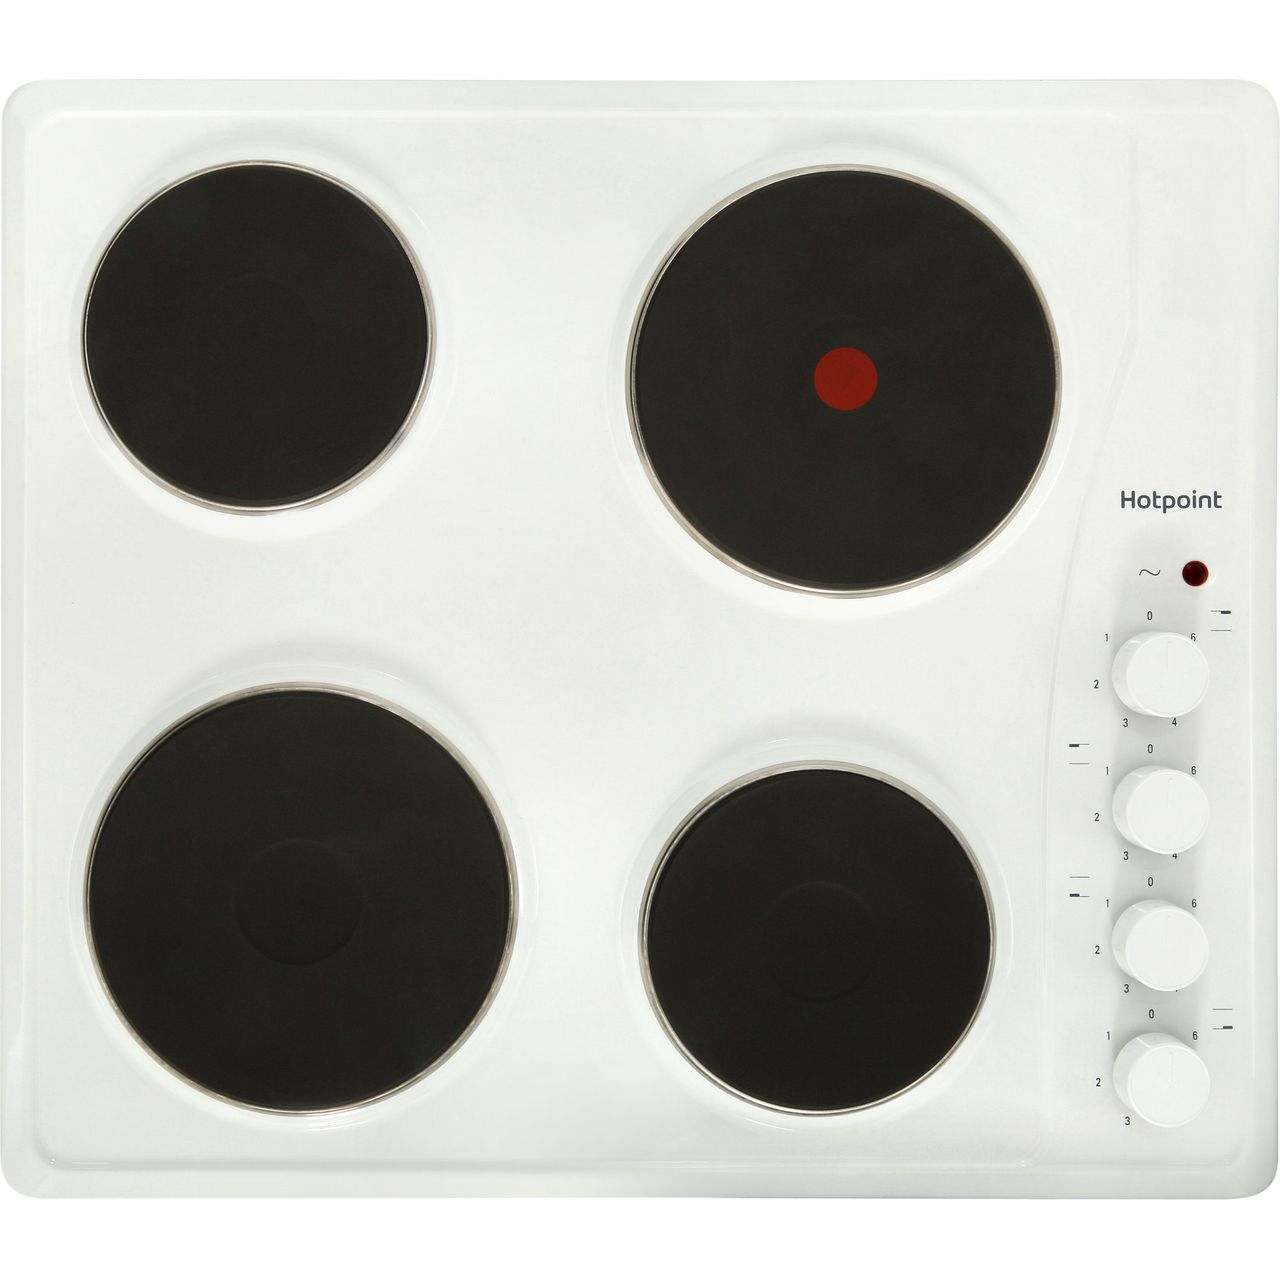 Hotpoint E604.1W 58cm Solid Plate Hob Review